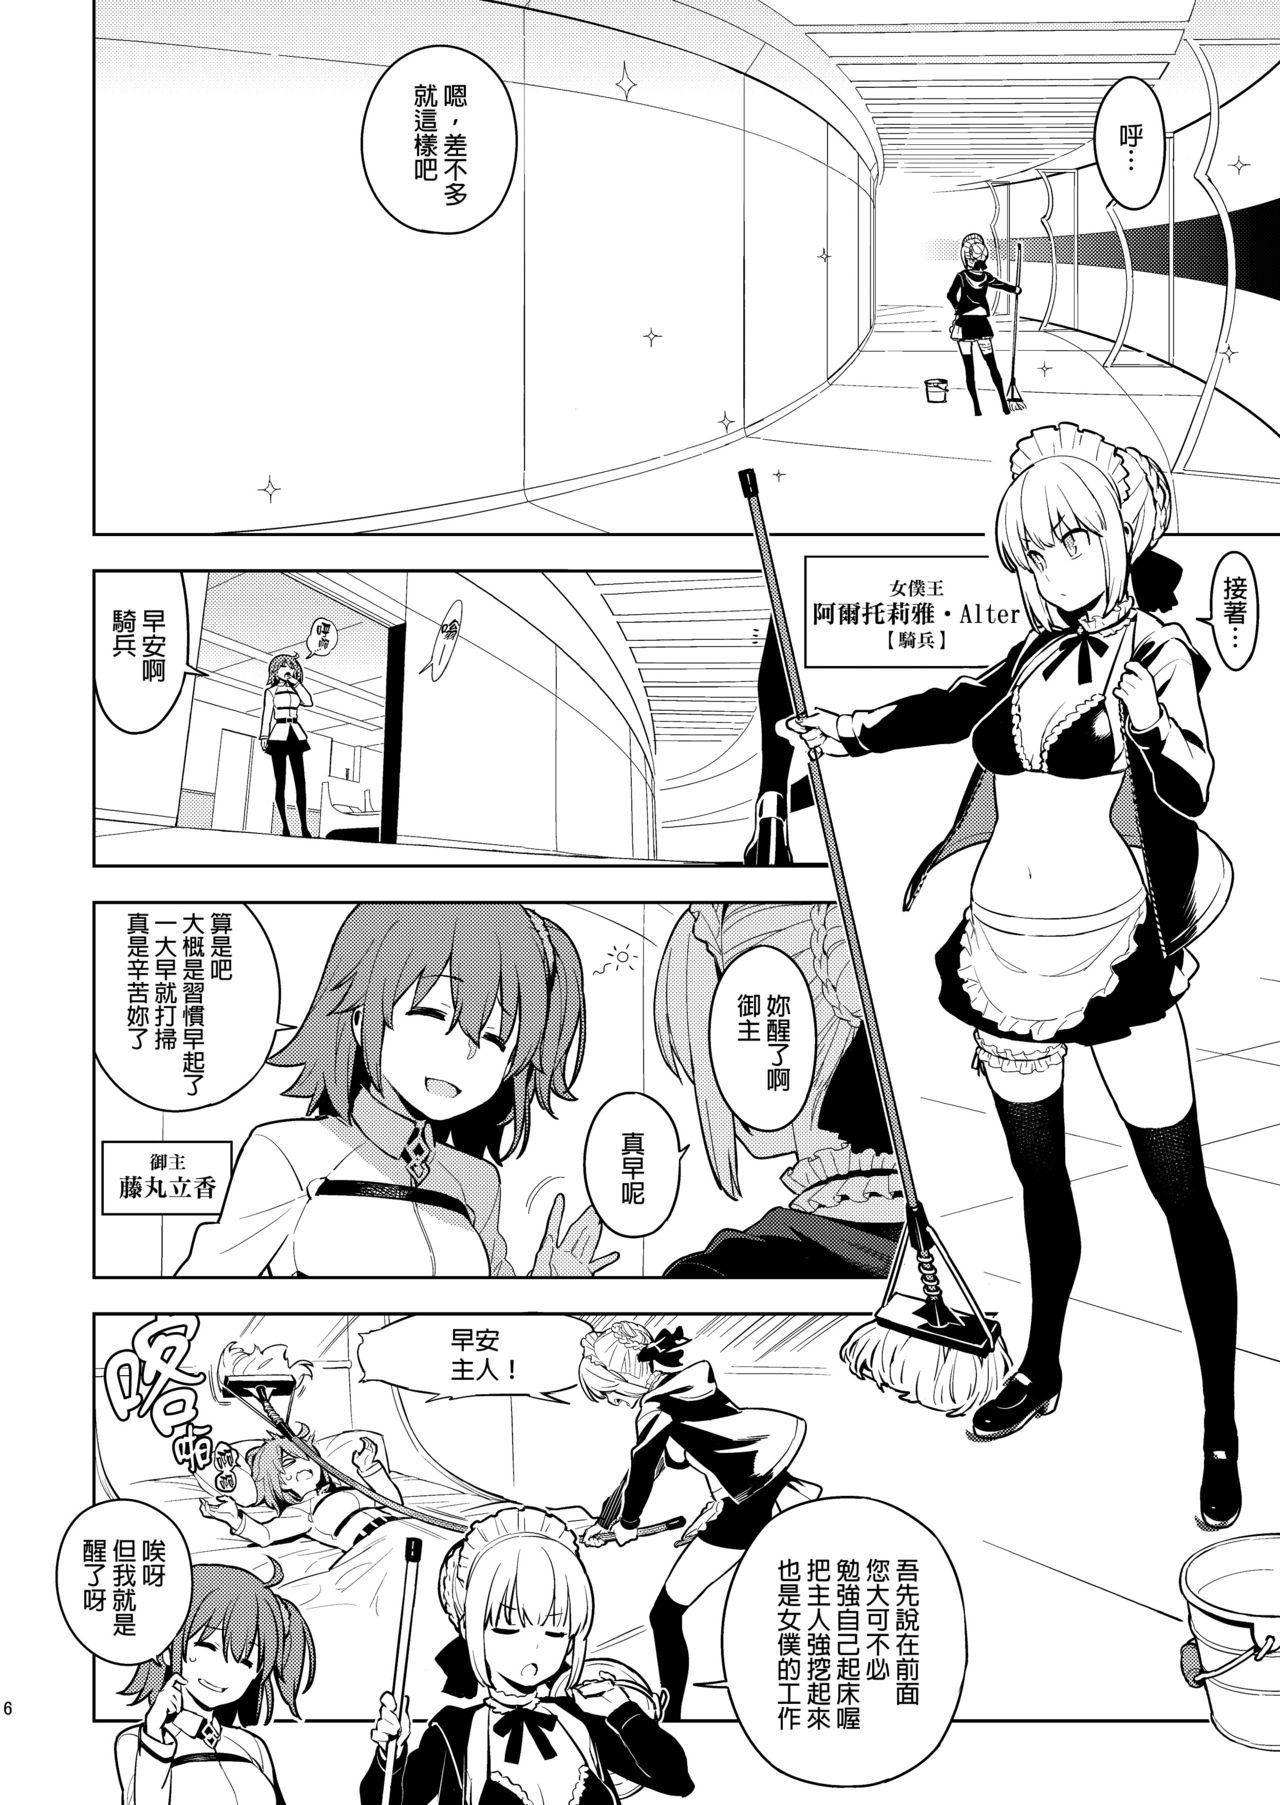 Youporn DELUSION - Fate grand order College - Page 5